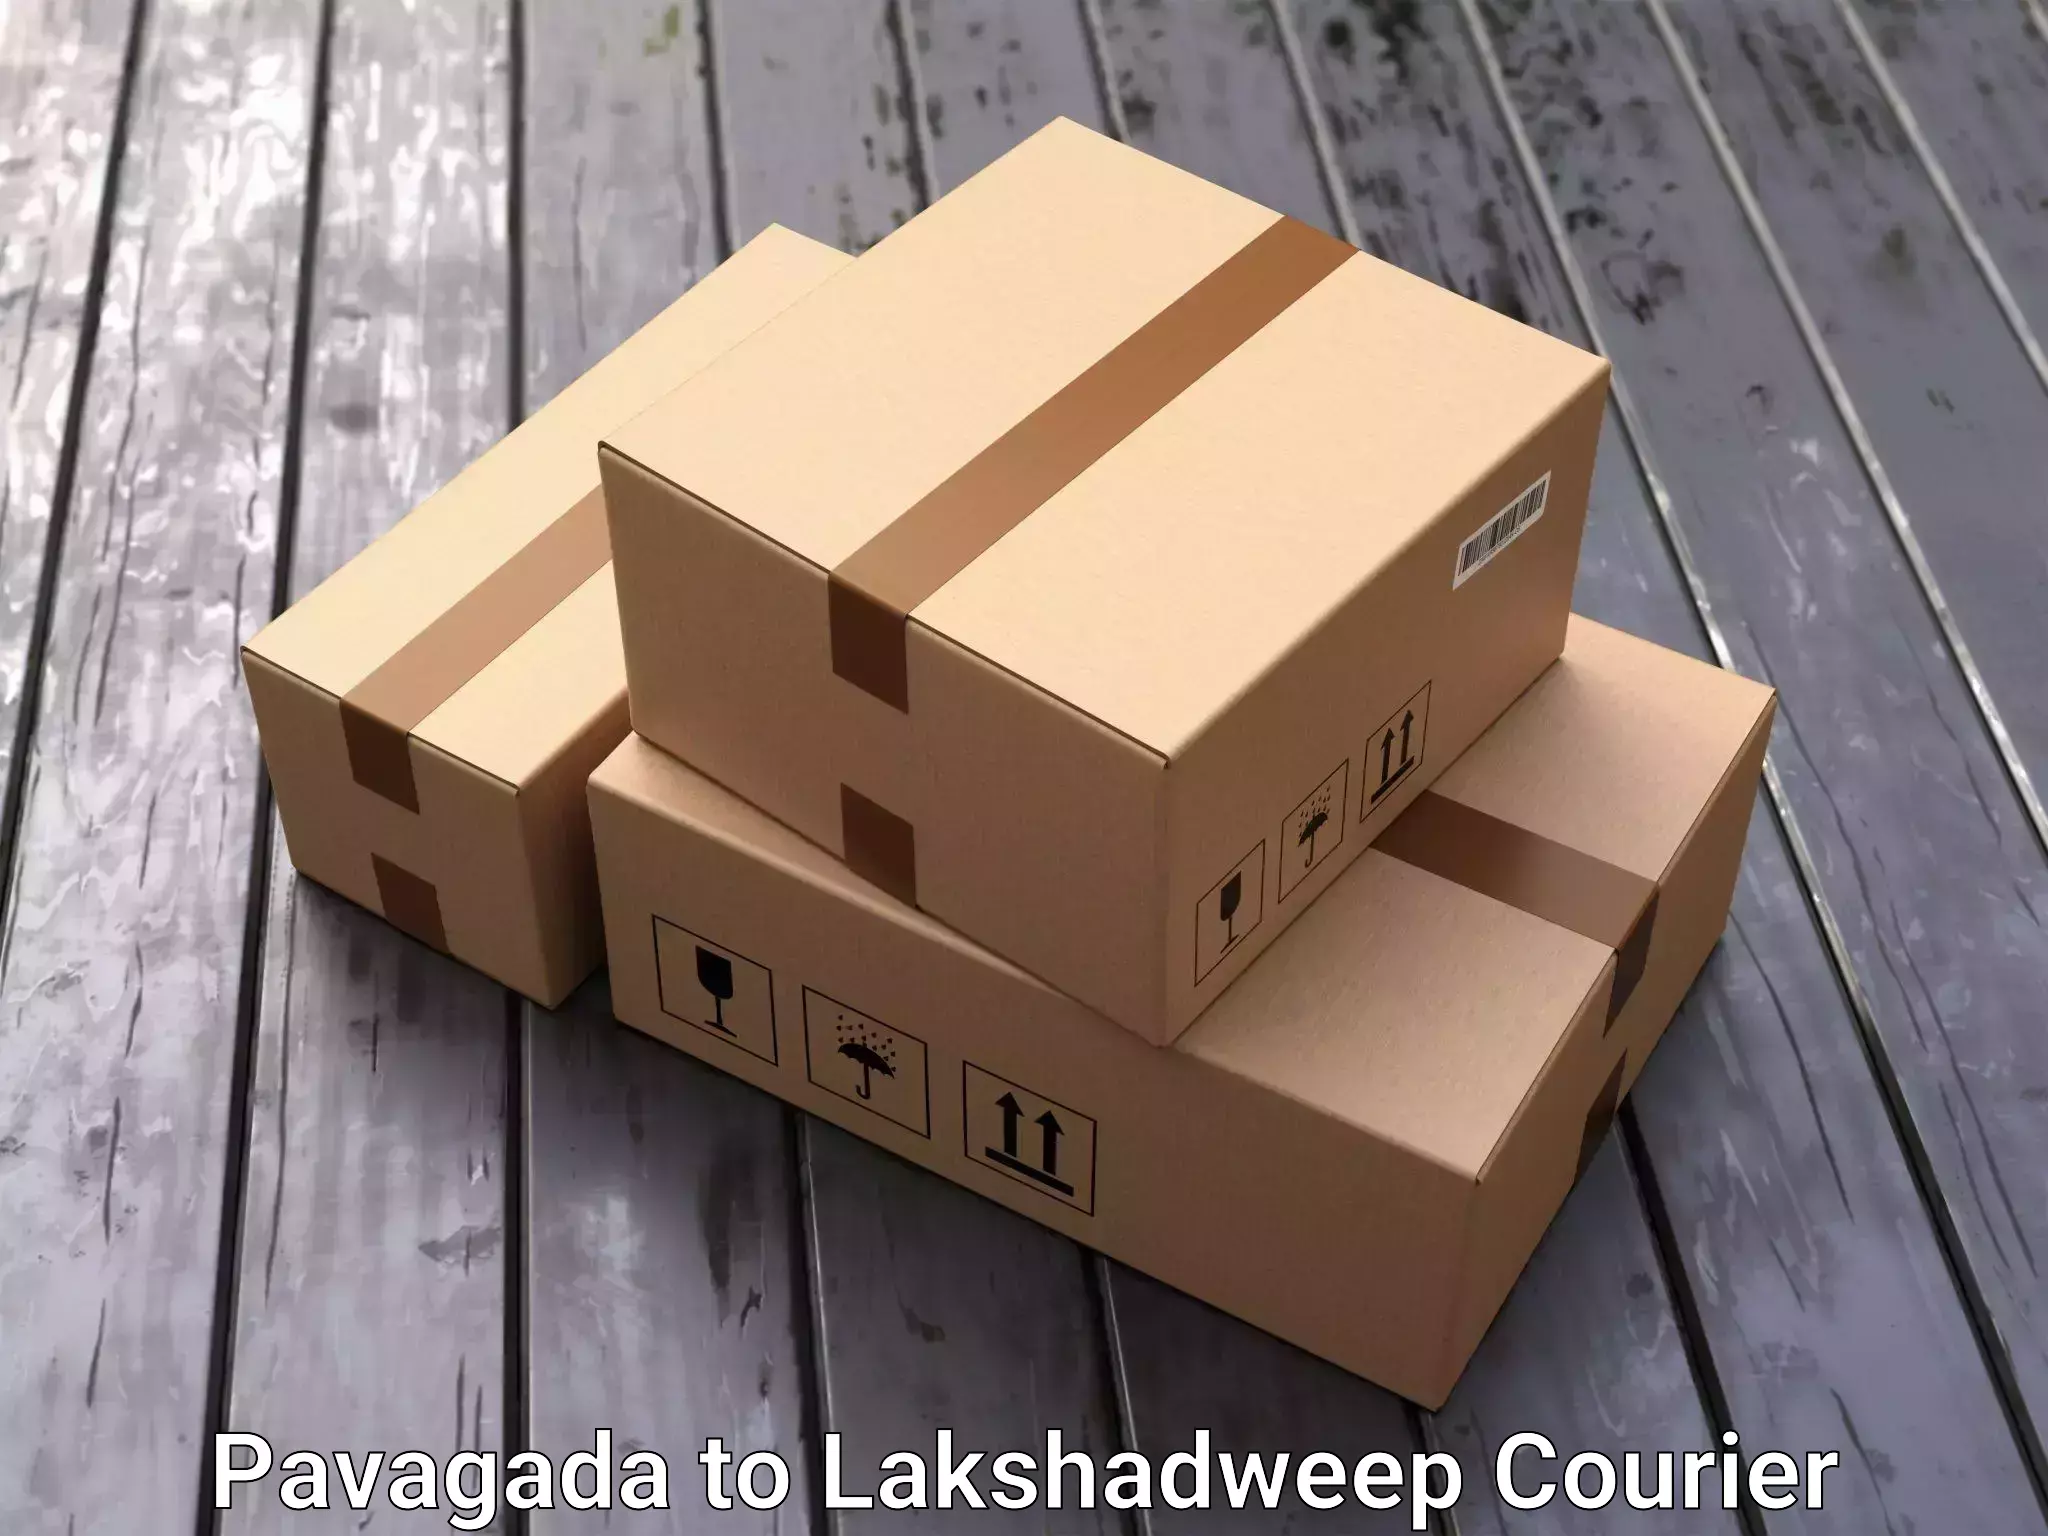 Trusted relocation experts Pavagada to Lakshadweep